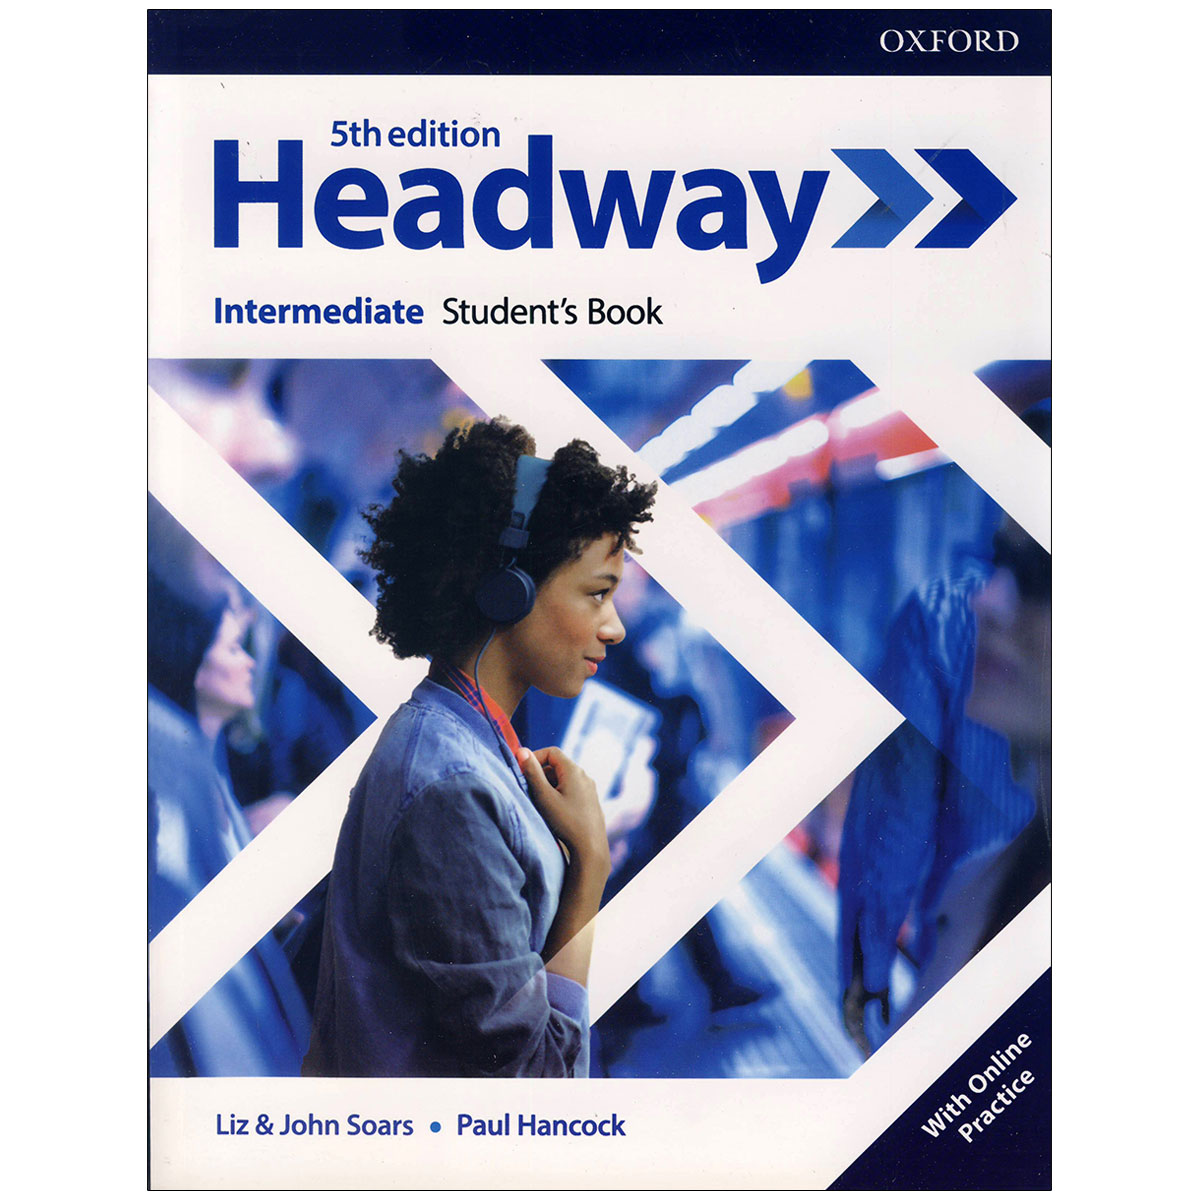 Headway advanced 5th edition. Headway Intermediate 5th Edition student book. Headway Culture and Literature. Хедвей певец. Headway books 5th Edition.